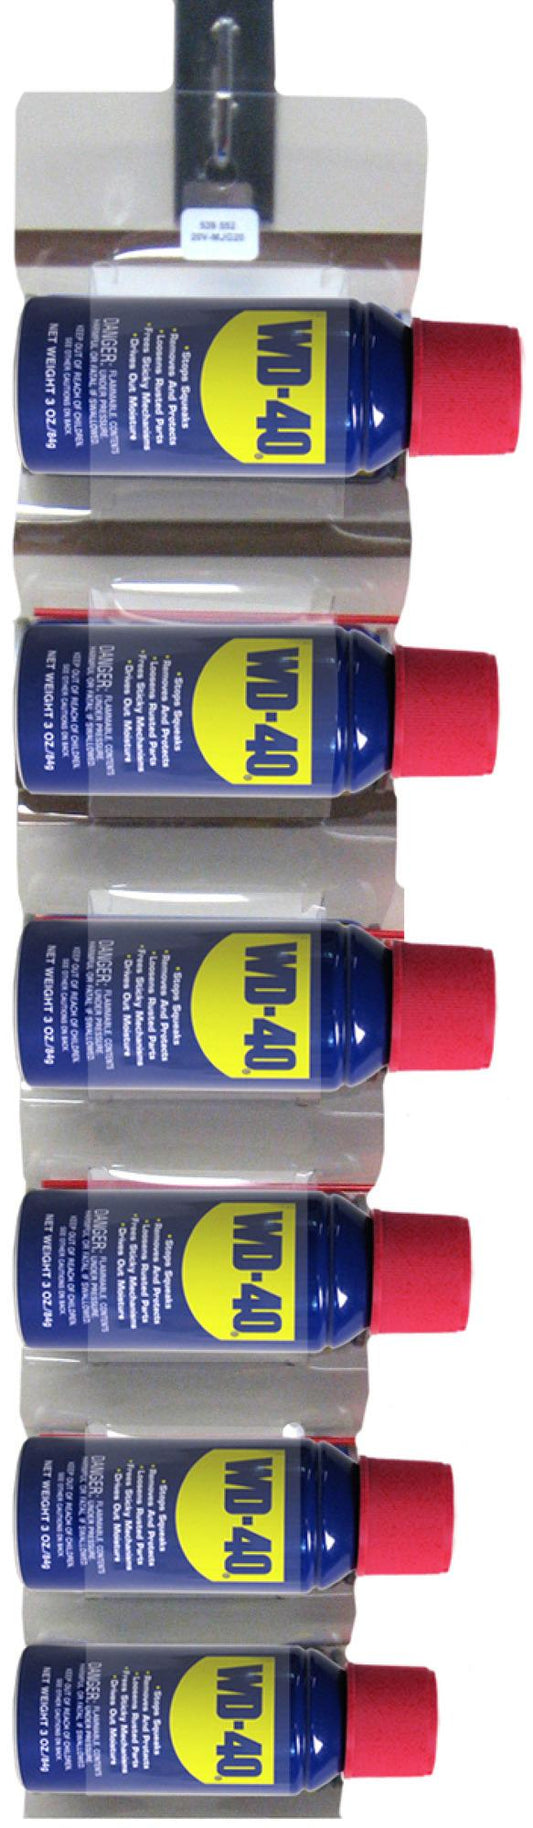 WD-40 490002 Multi-Use Product, 3